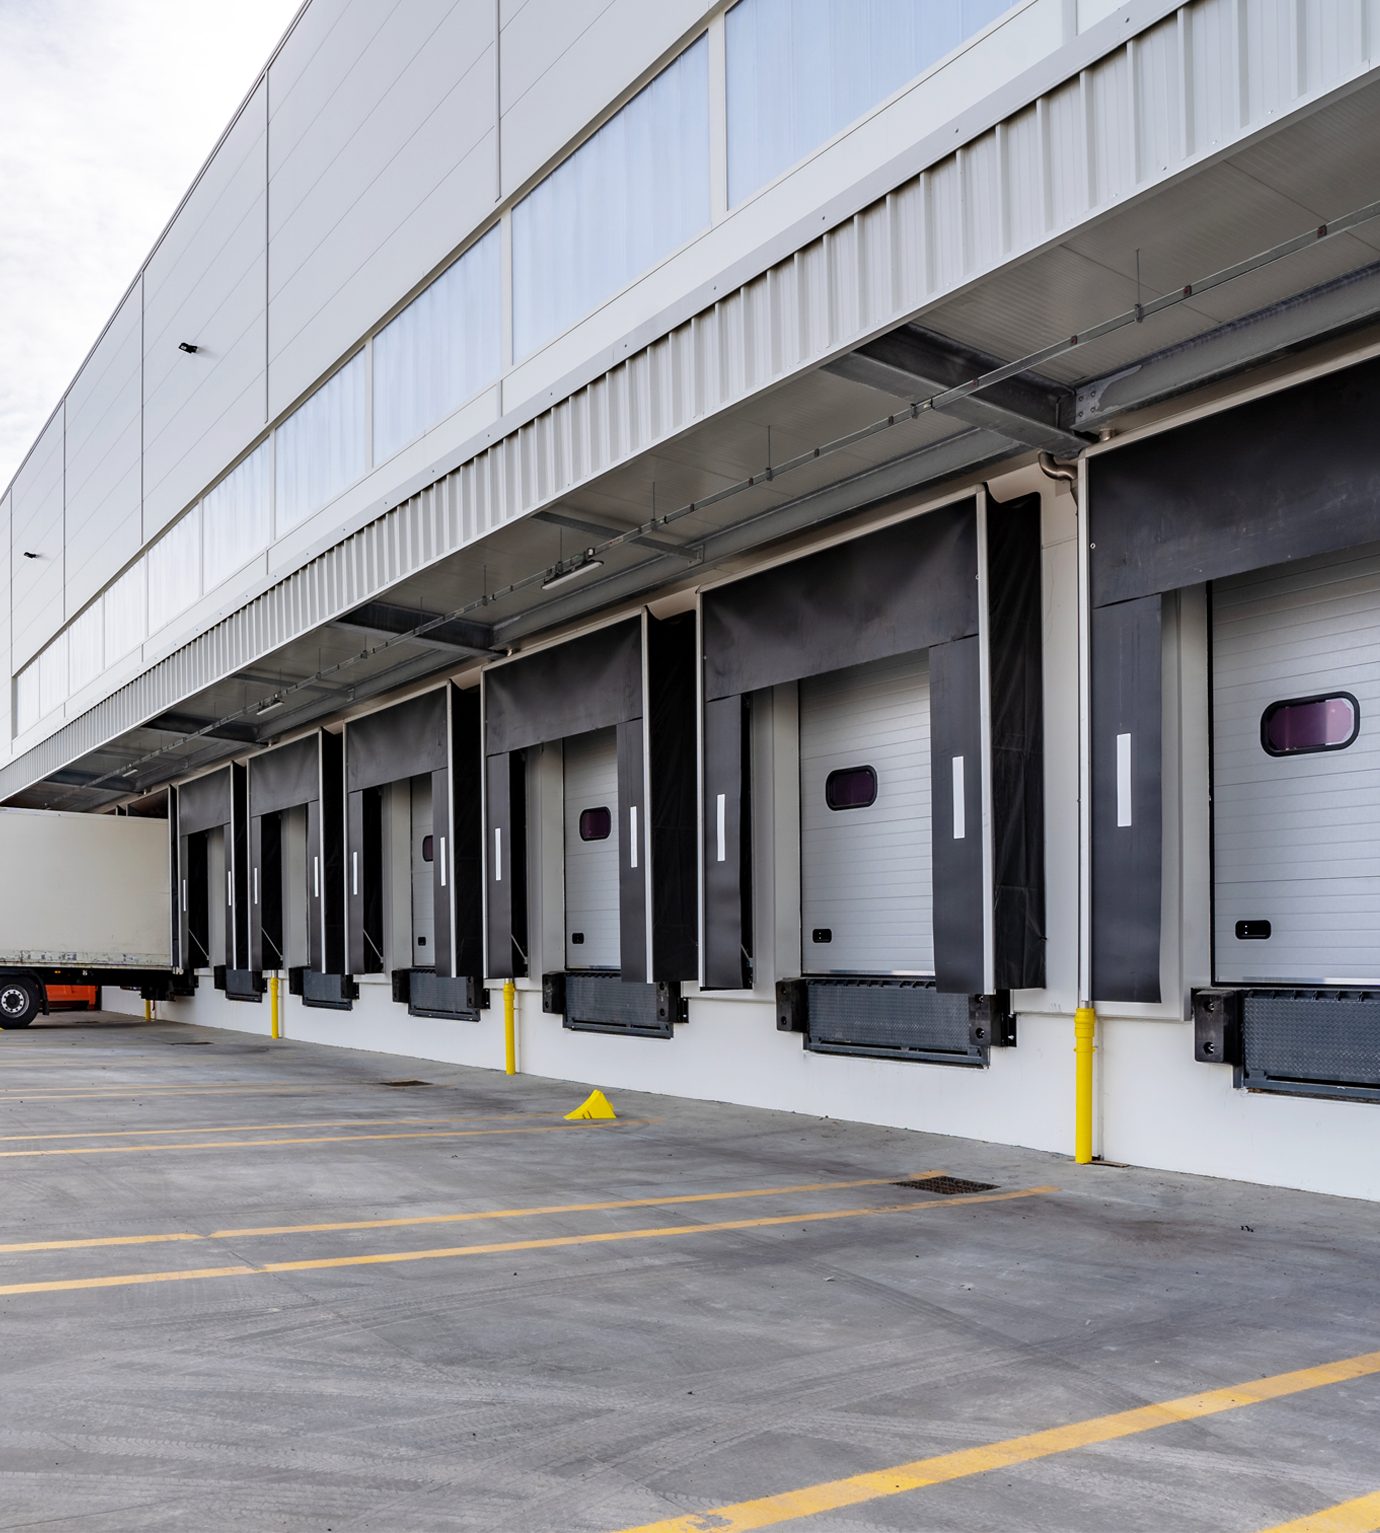 A warehouse loading dock ready for pick-up and delivery.